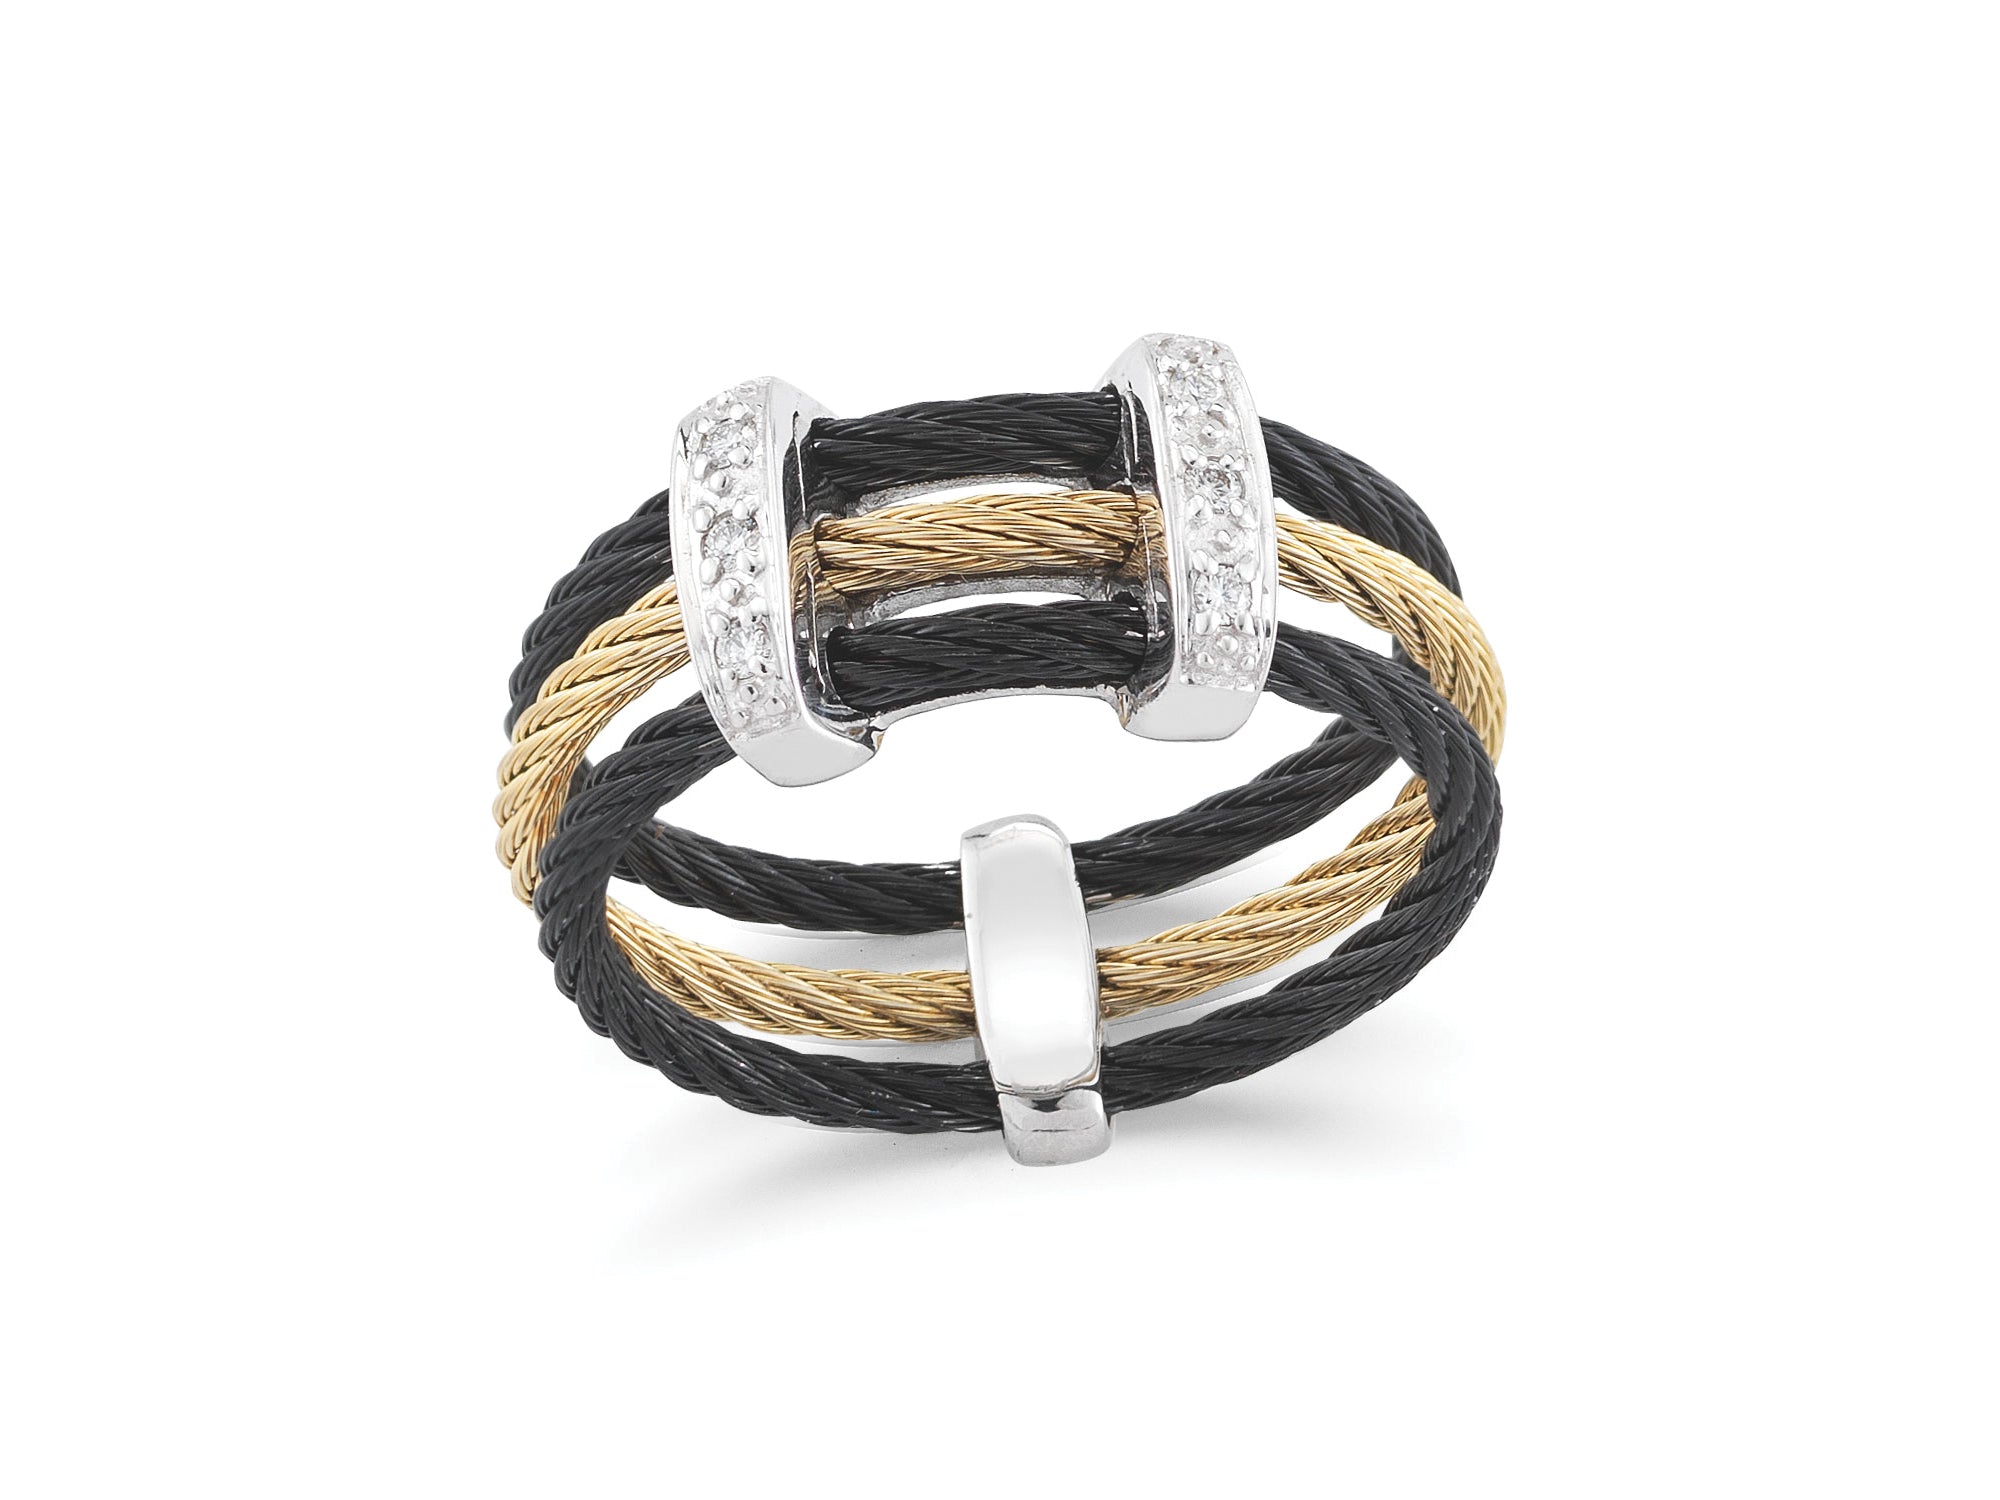 Alor Black cable and yellow cable, 18 karat White Gold, 0.05 total carat weight Diamonds with stainless steel. Imported.